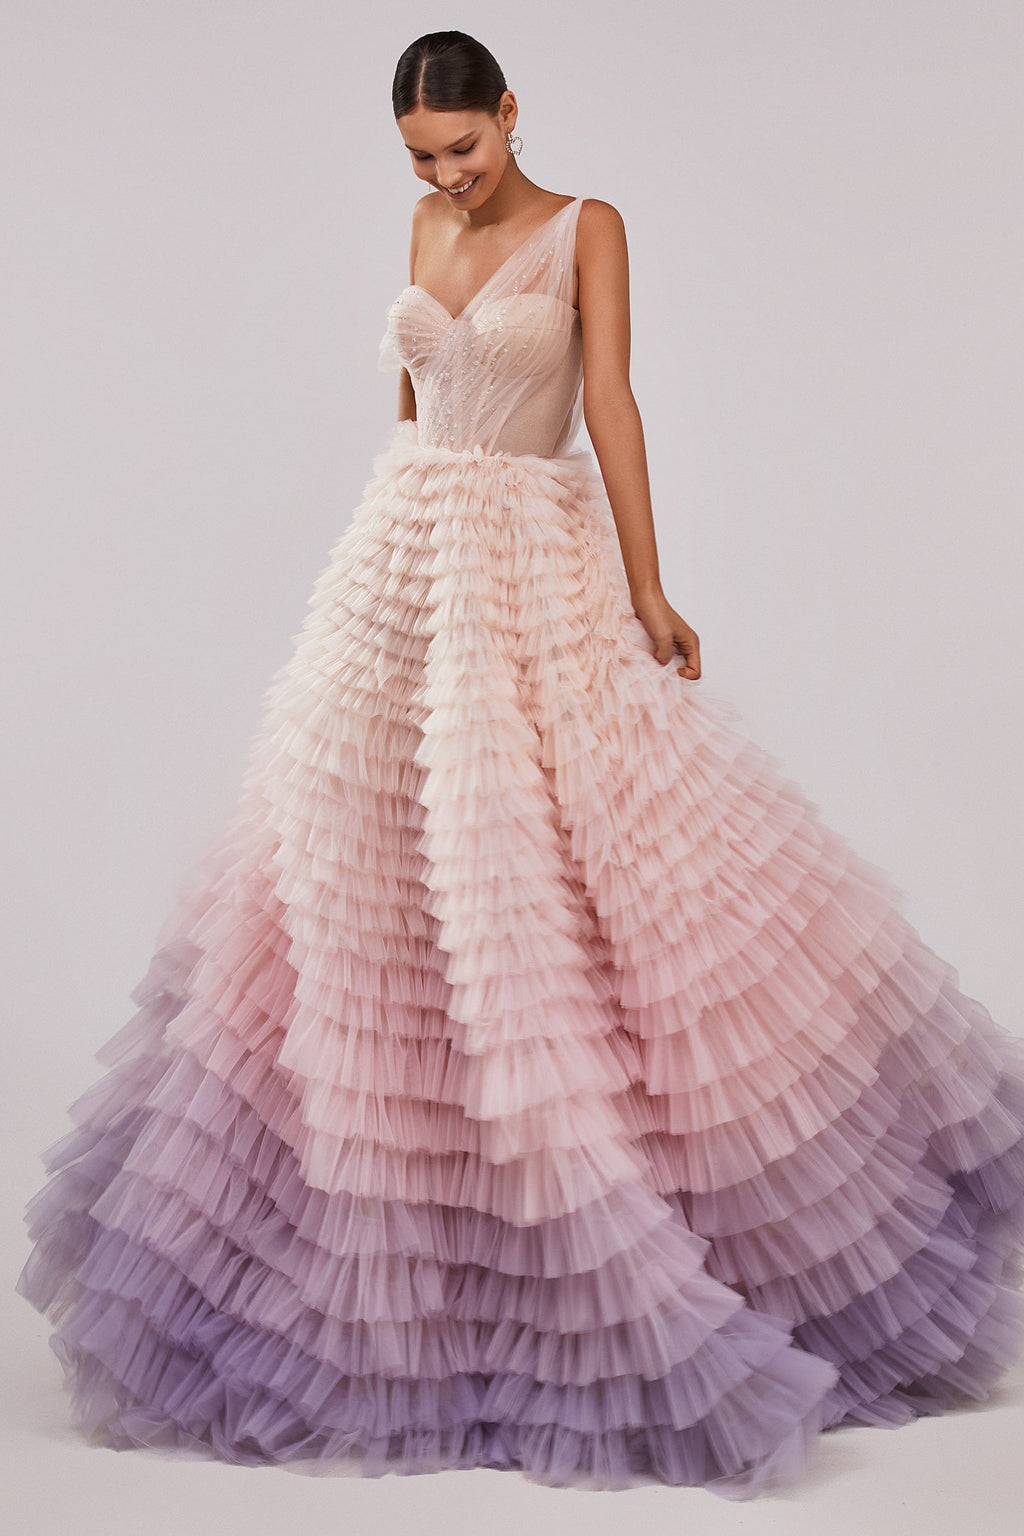 Charming ball gown with the frill-layered ombre maxi skirt